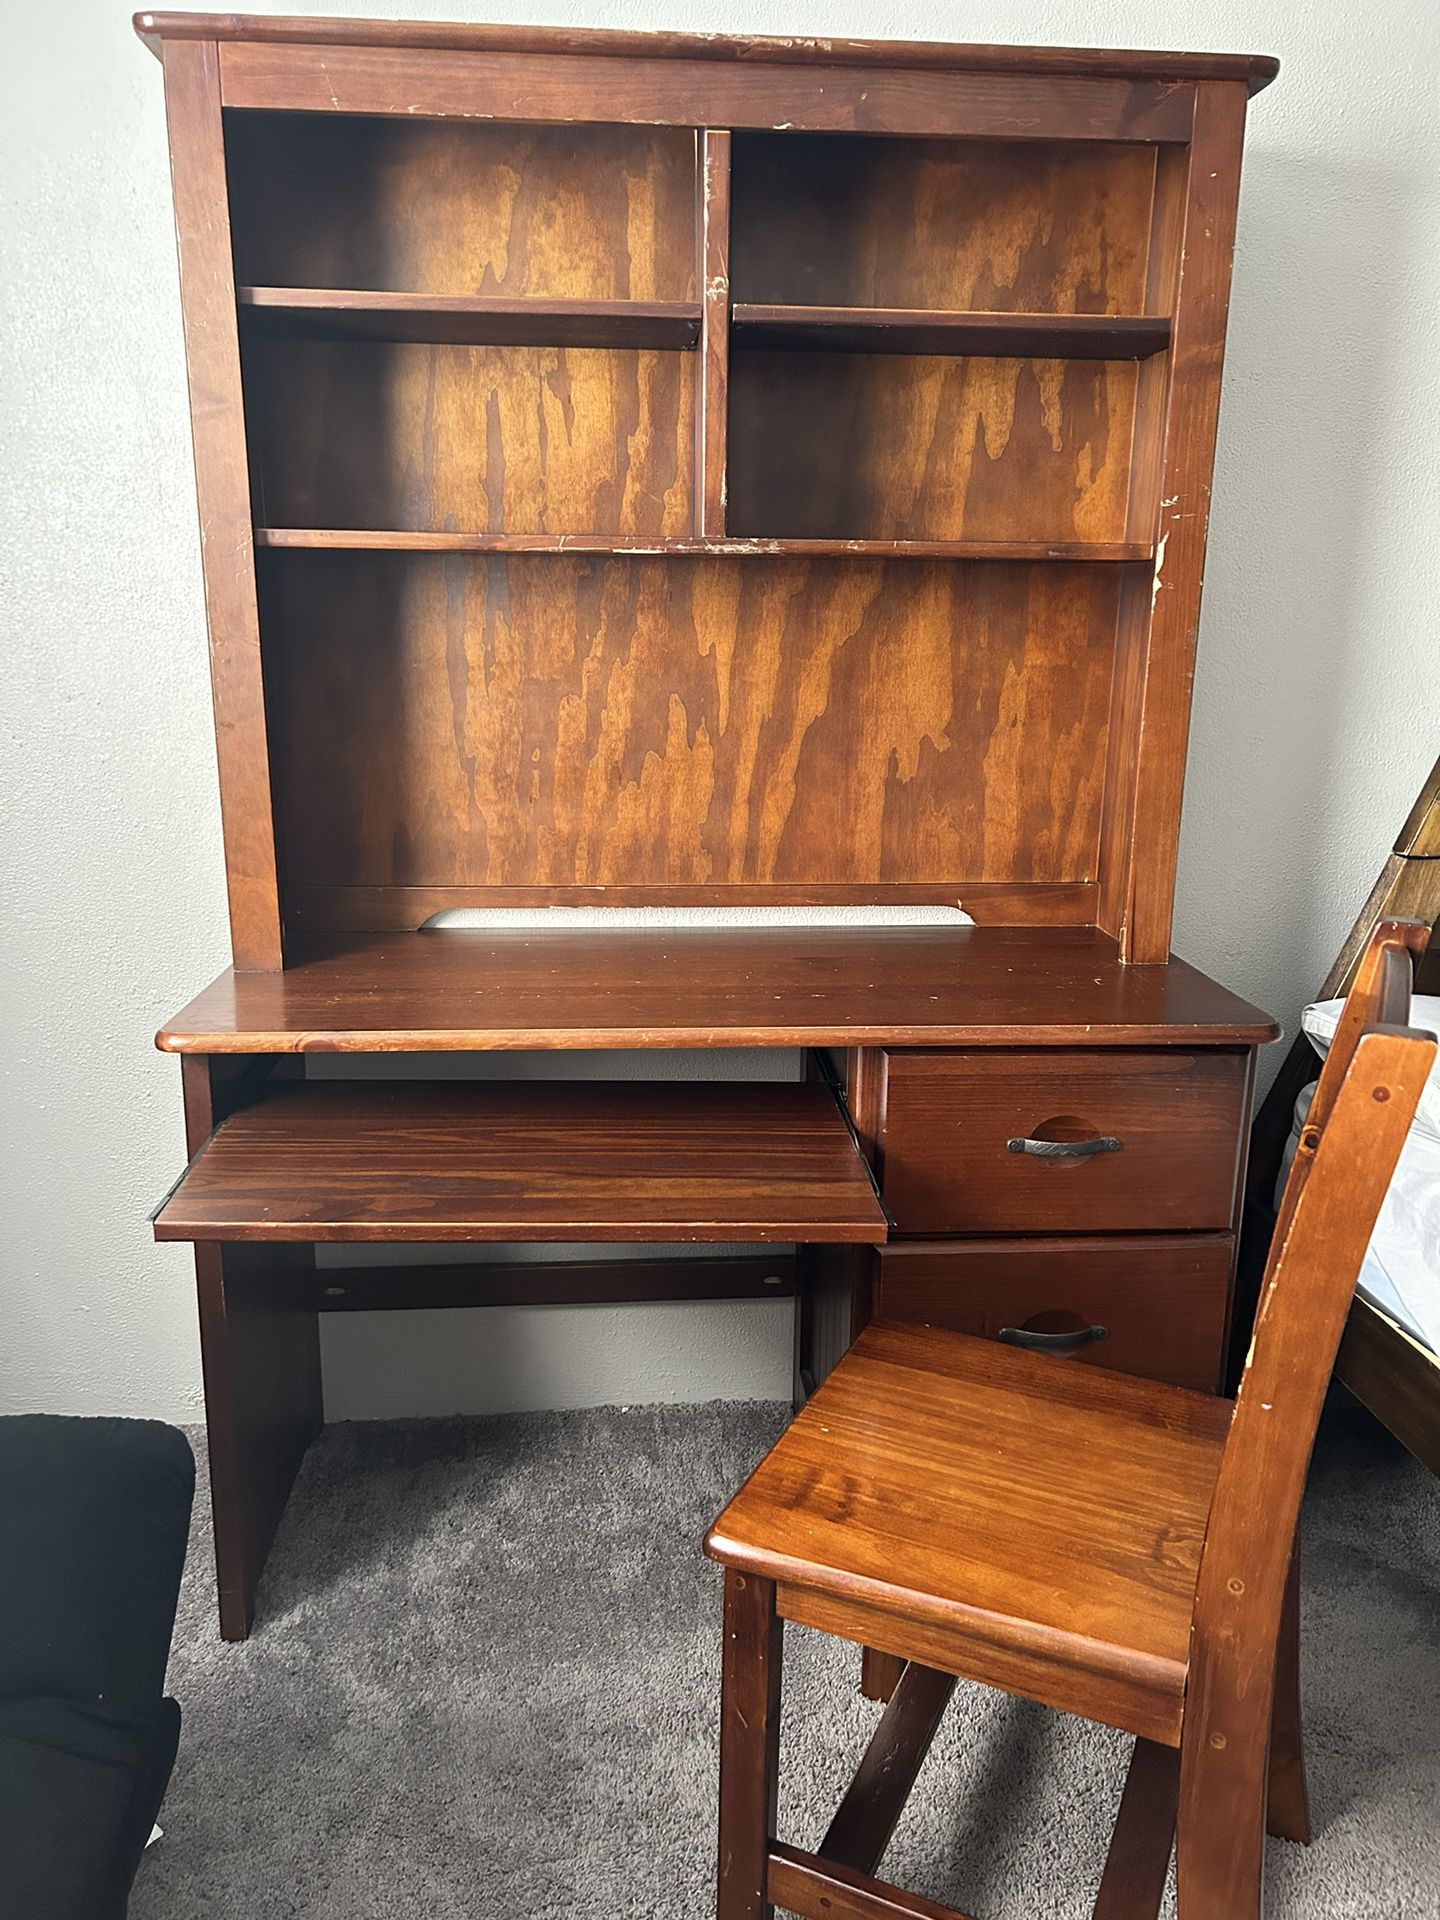 Wooden Desk, Hutch And Chair